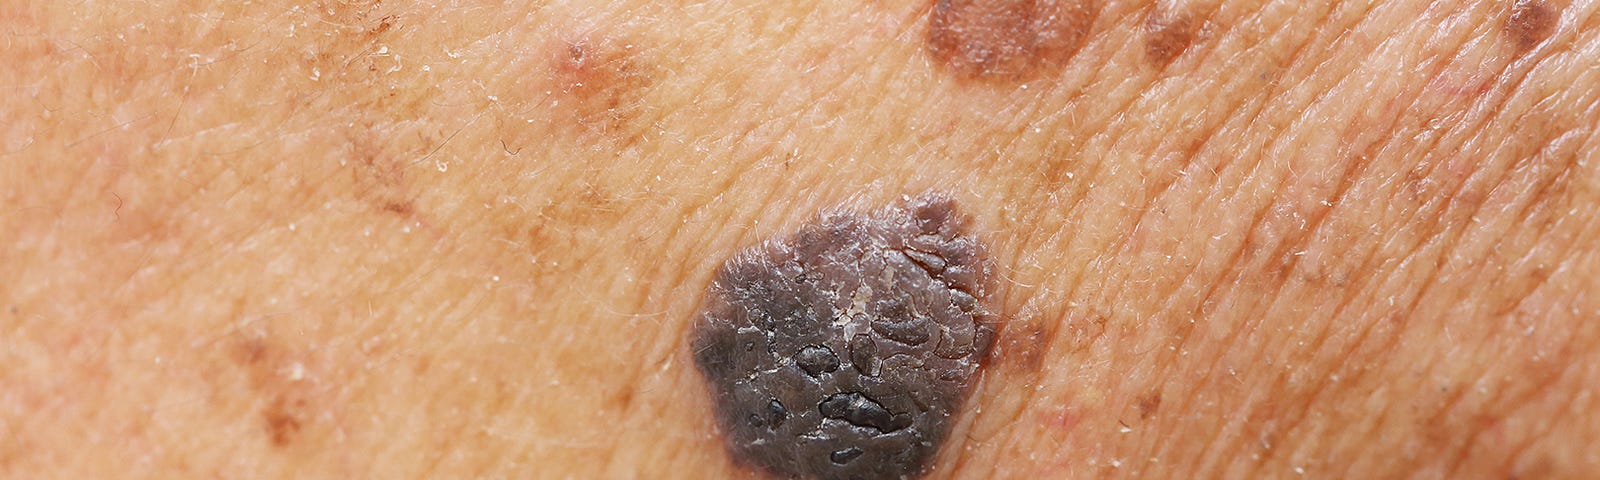 Moles, which are characterized as a small brownish spot, are a common growt...